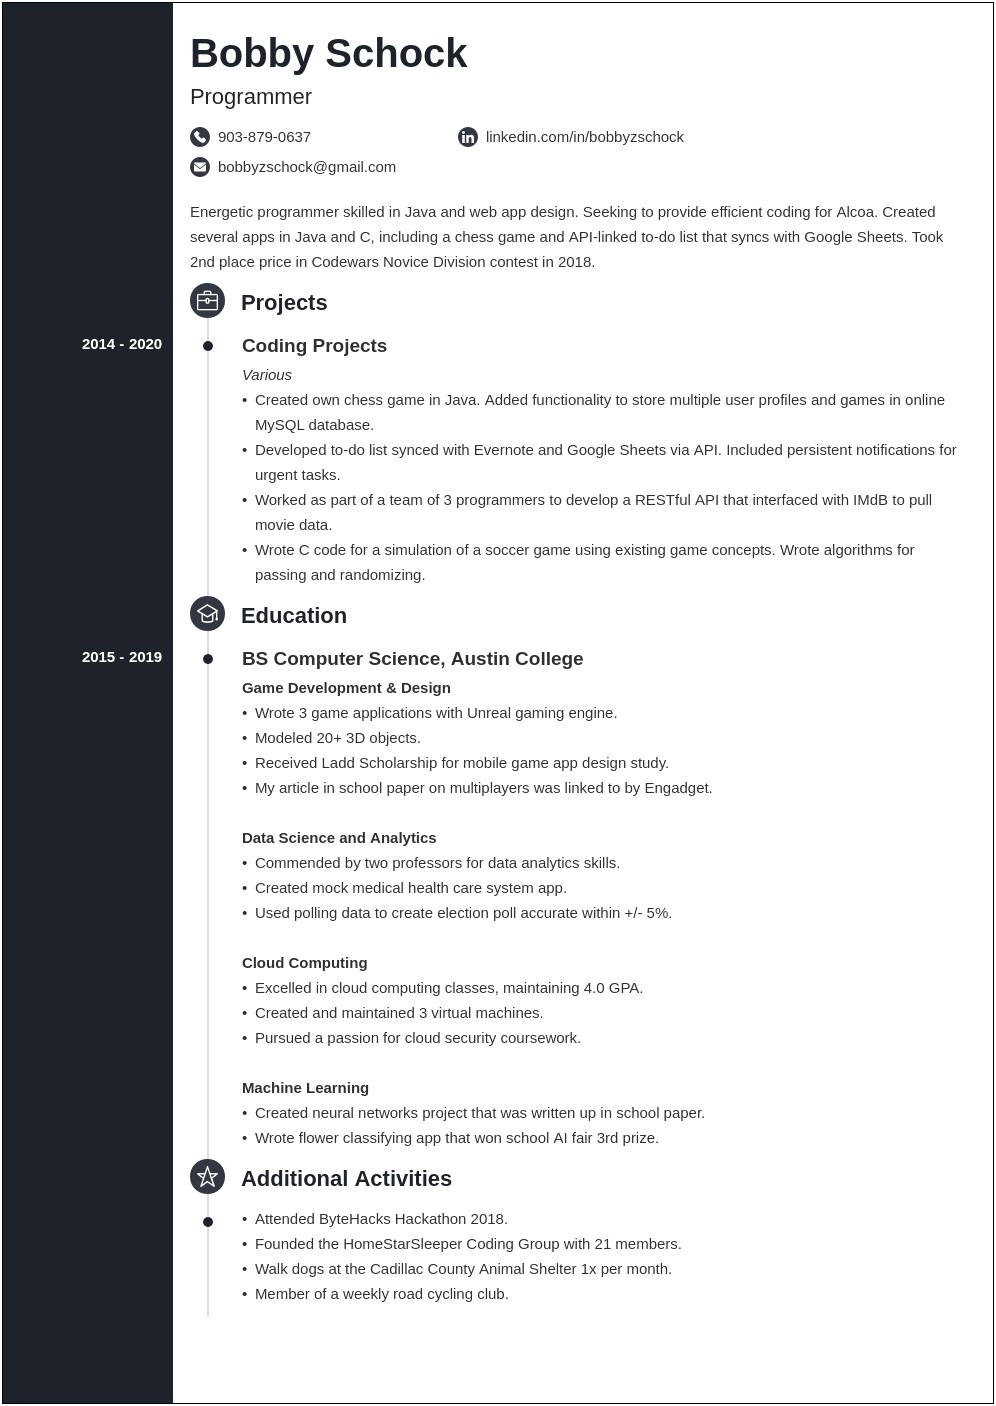 Creating A Resume With No Job Experience